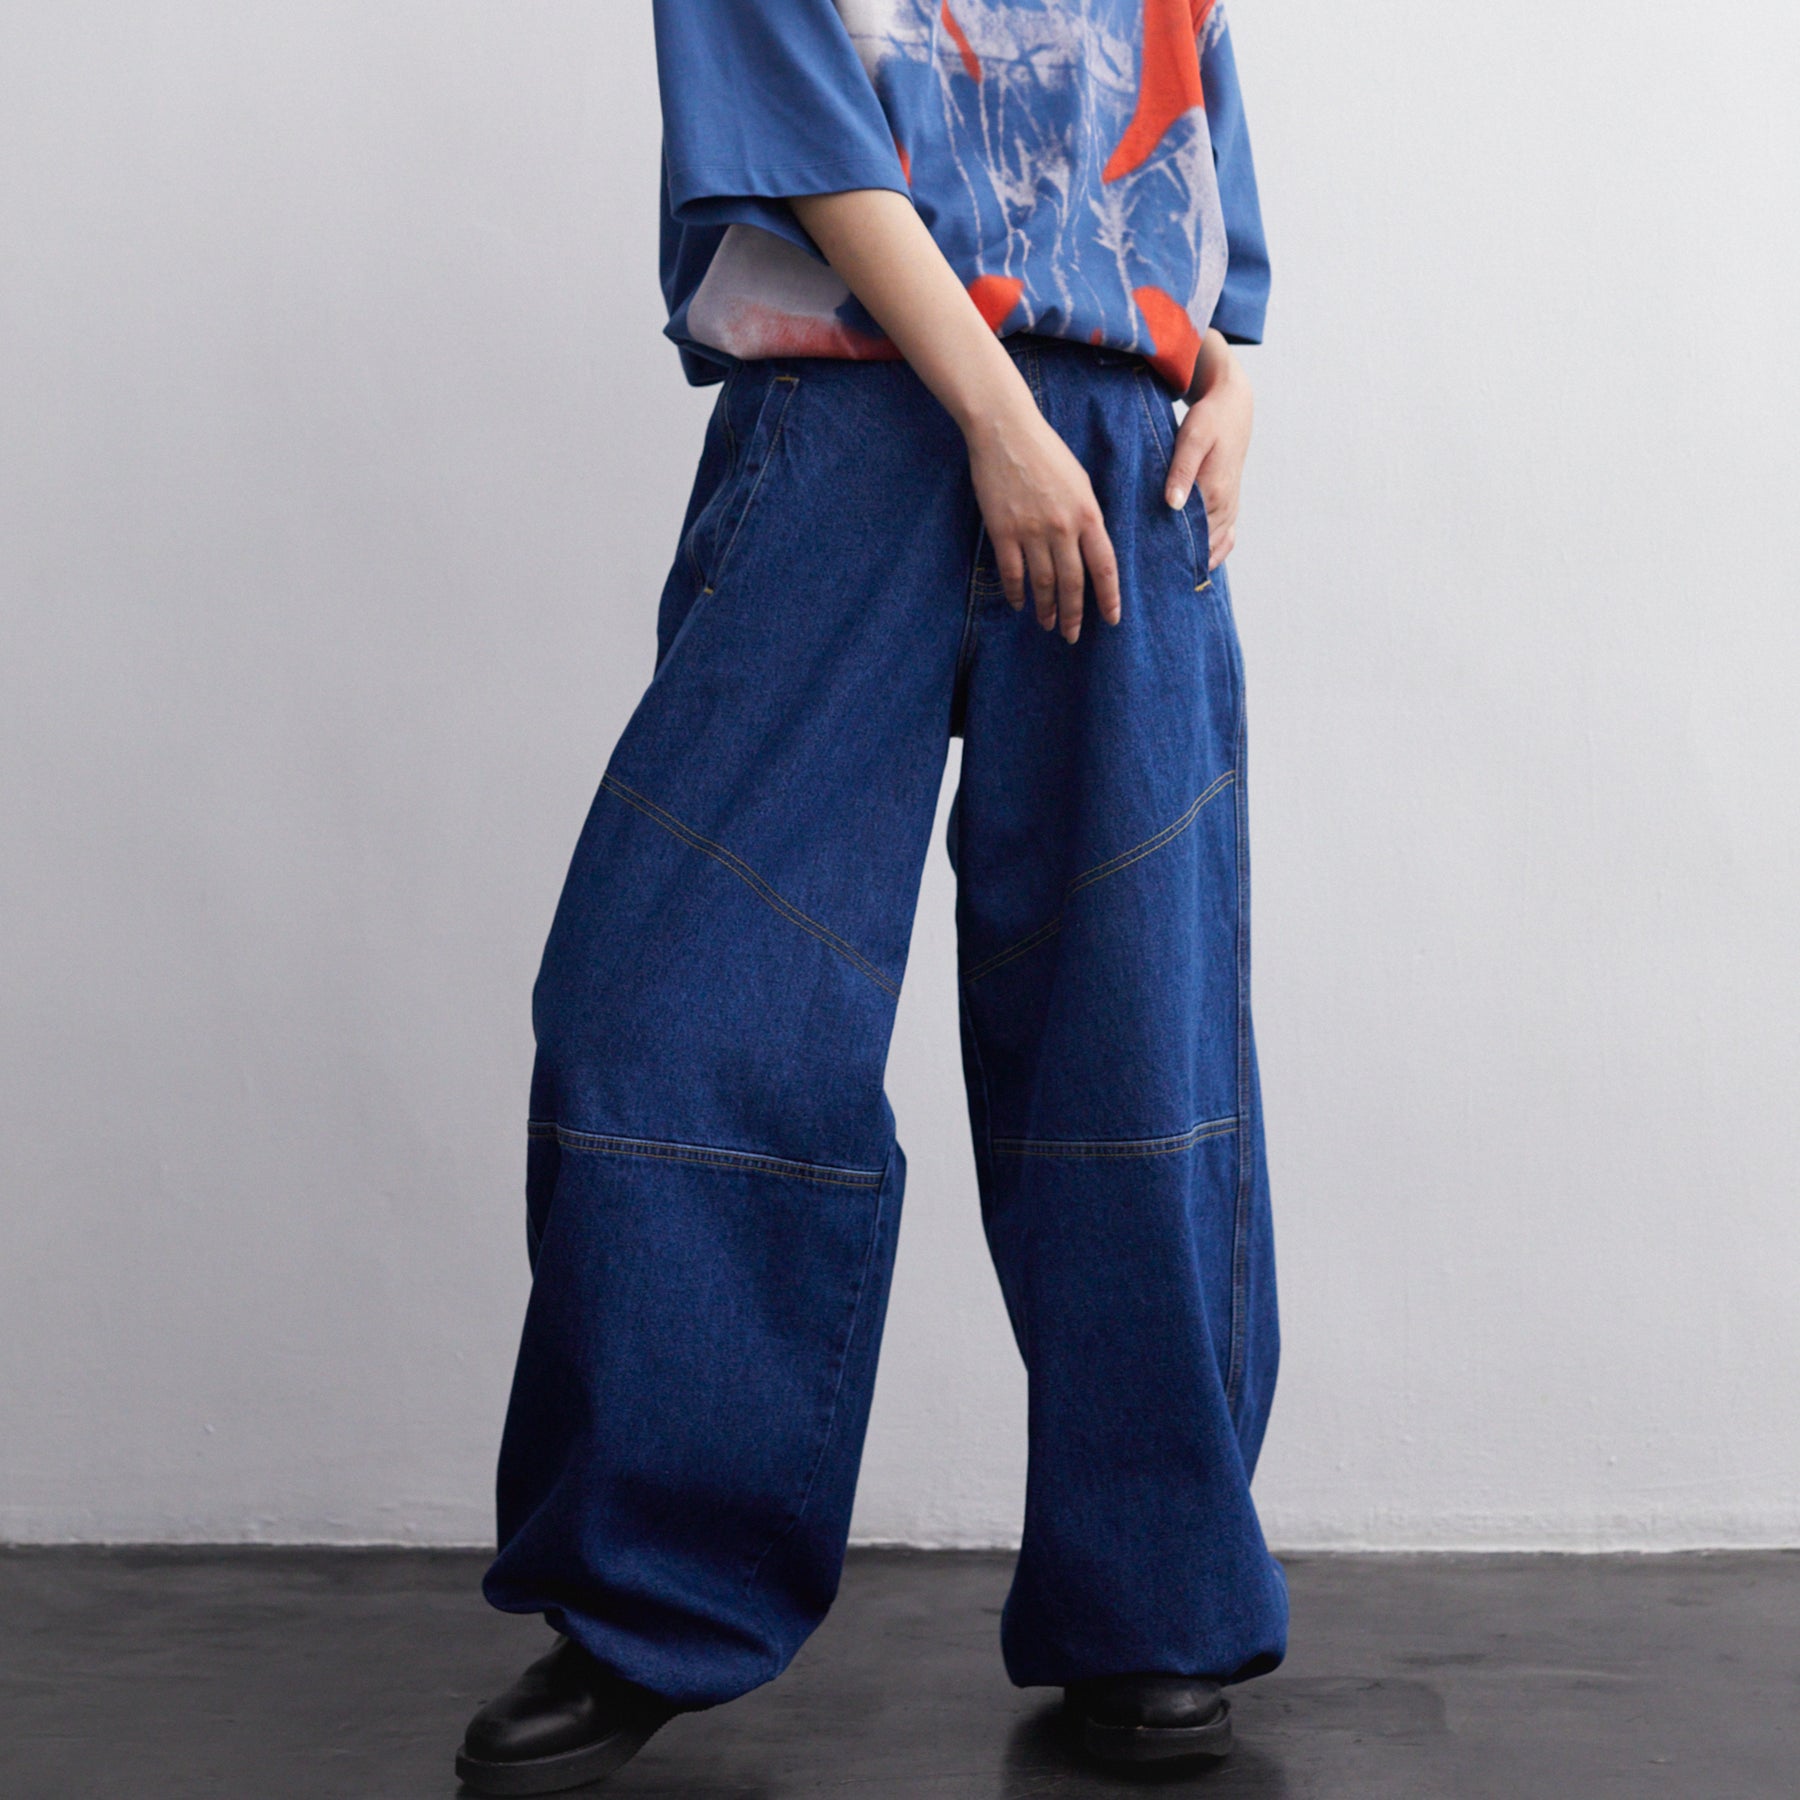 WILLY CHAVARRIA / RAVER PANT WASHED BLUE DENIM